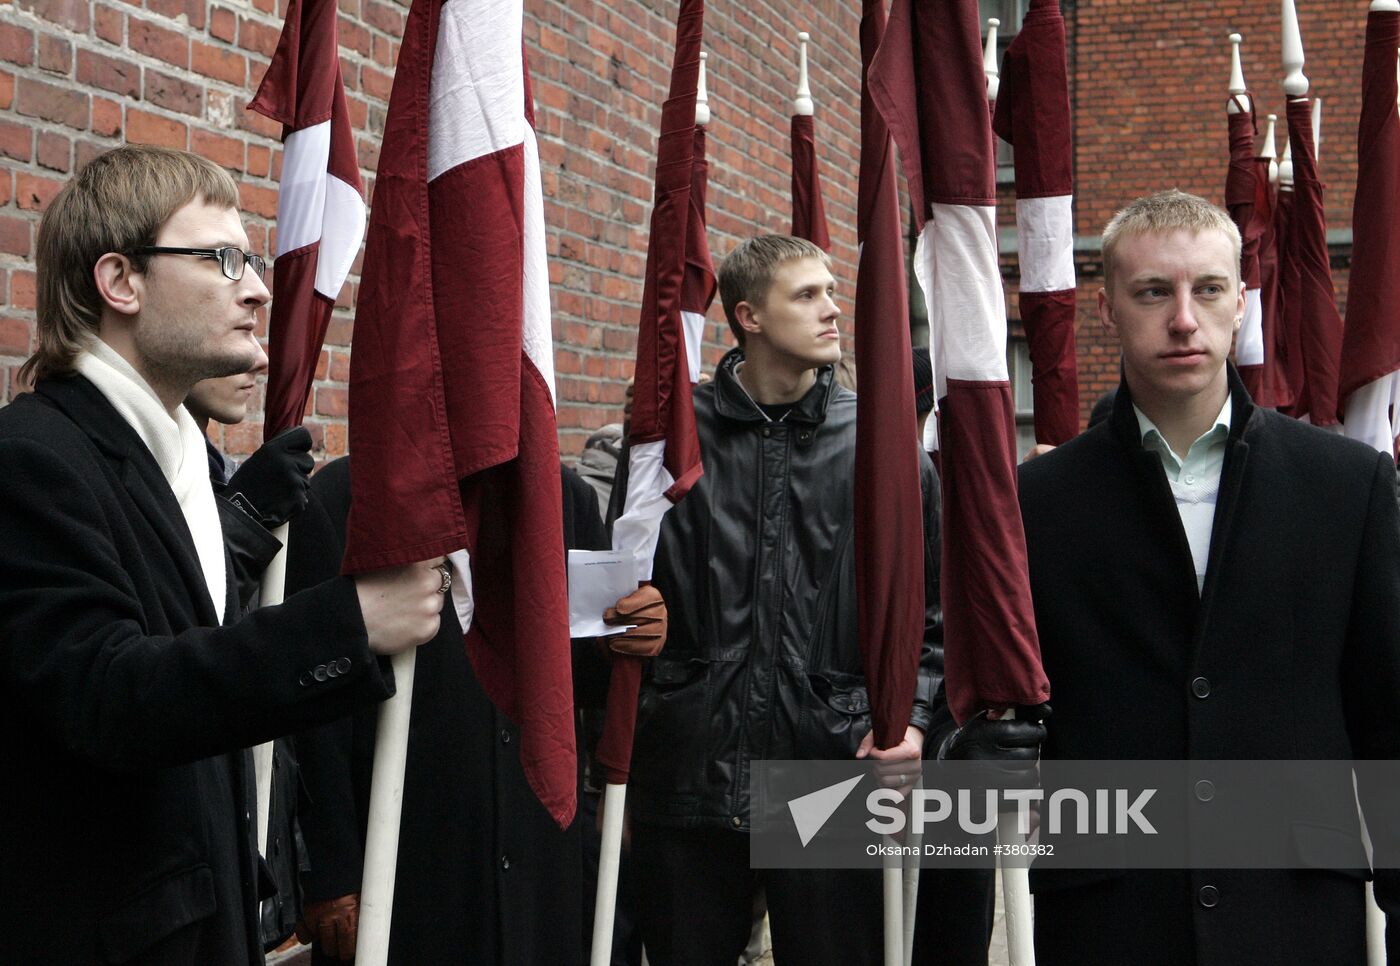 Waffen SS legionnaires and their supporters marching in Riga